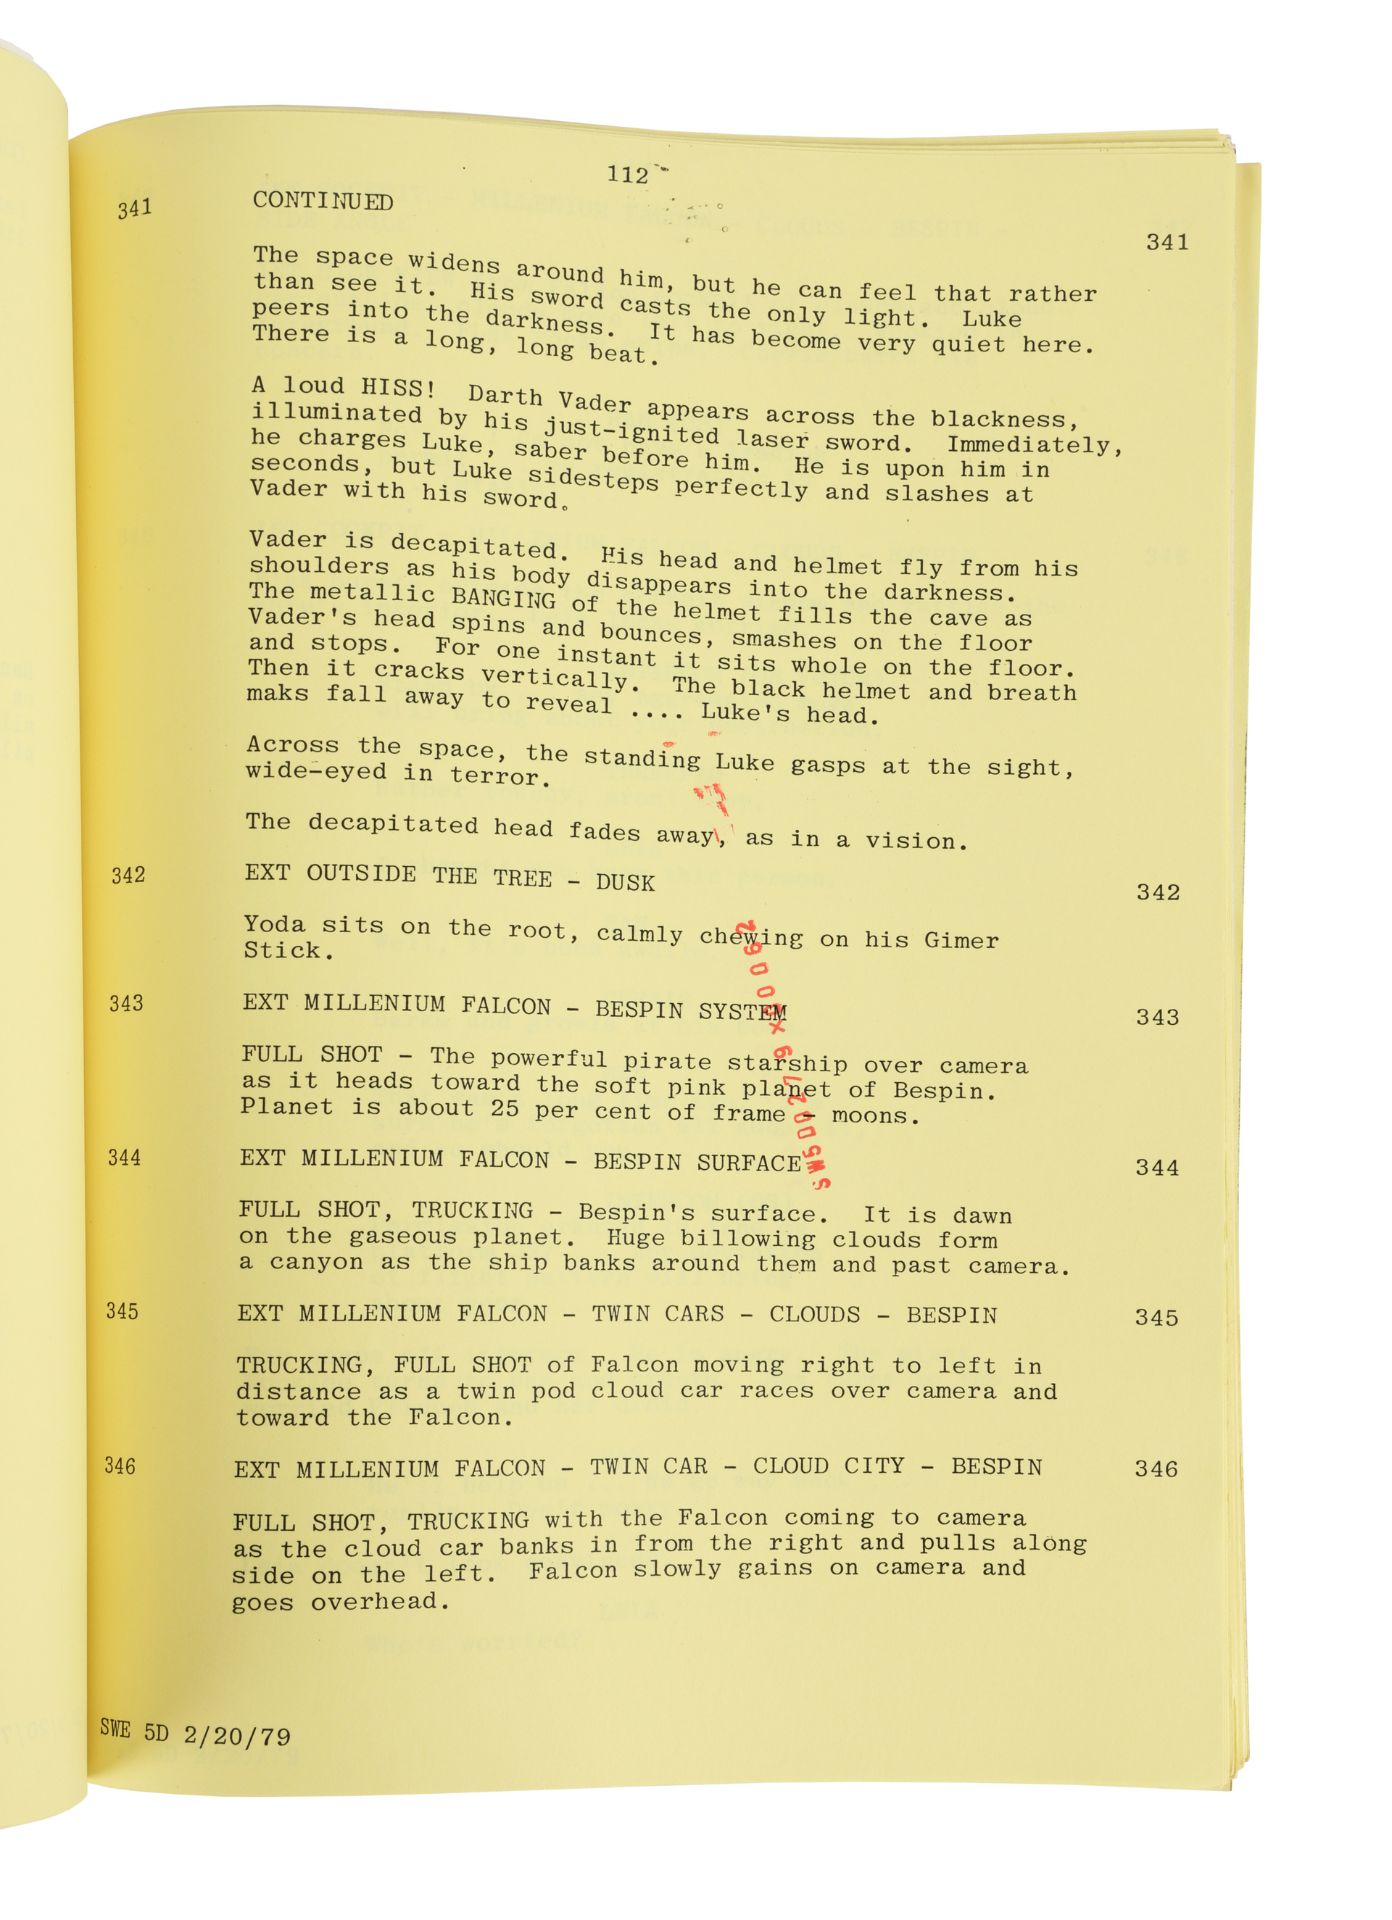 STAR WARS: THE EMPIRE STRIKES BACK (1980) - Anthony Daniels Collection: Hand-annotated Partial Scrip - Image 8 of 12